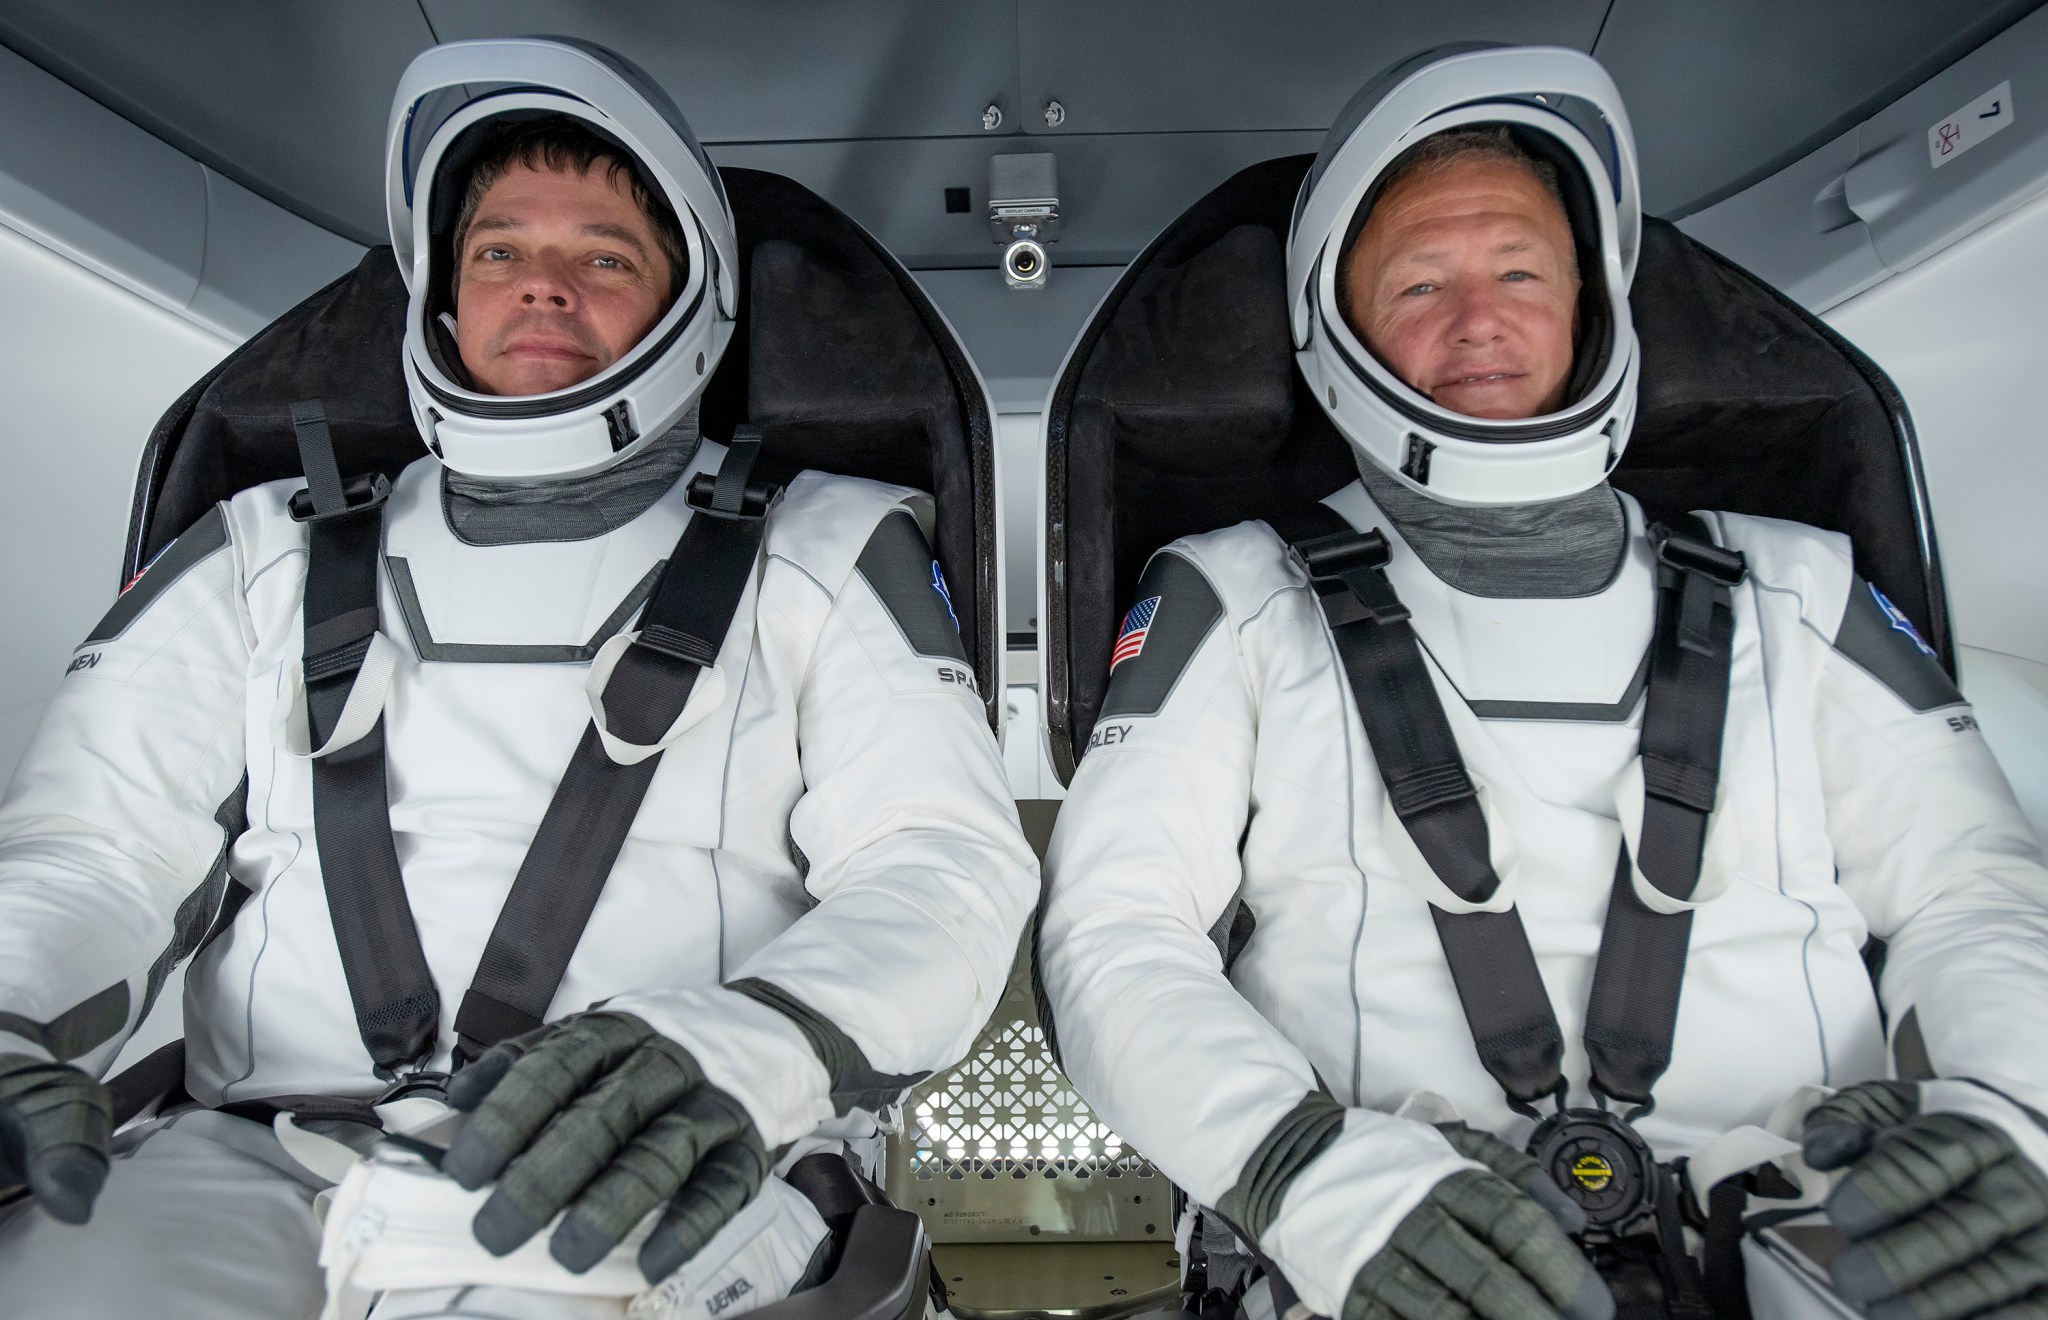 Bob Behnken, left, and Doug Hurley photographed inside the Crew Dragon spacecraft, wearing their SpaceX spacesuits.